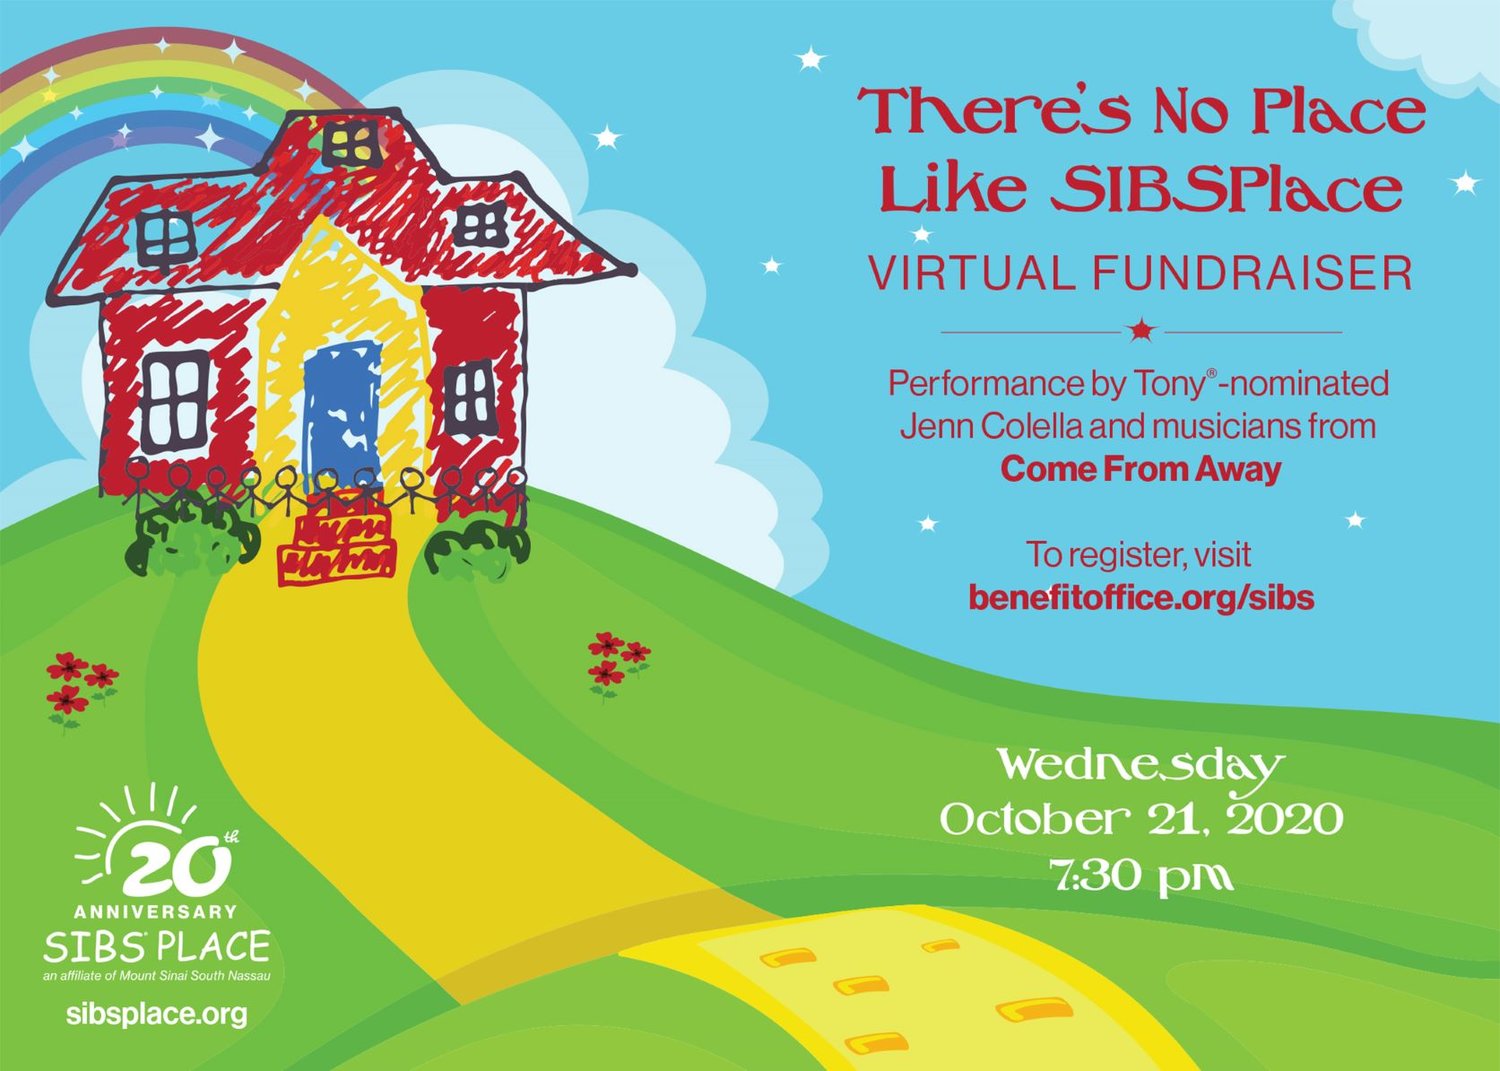 Support SIBSPlace and watch Tony Award-winning Broadway performances on Oct. 21.